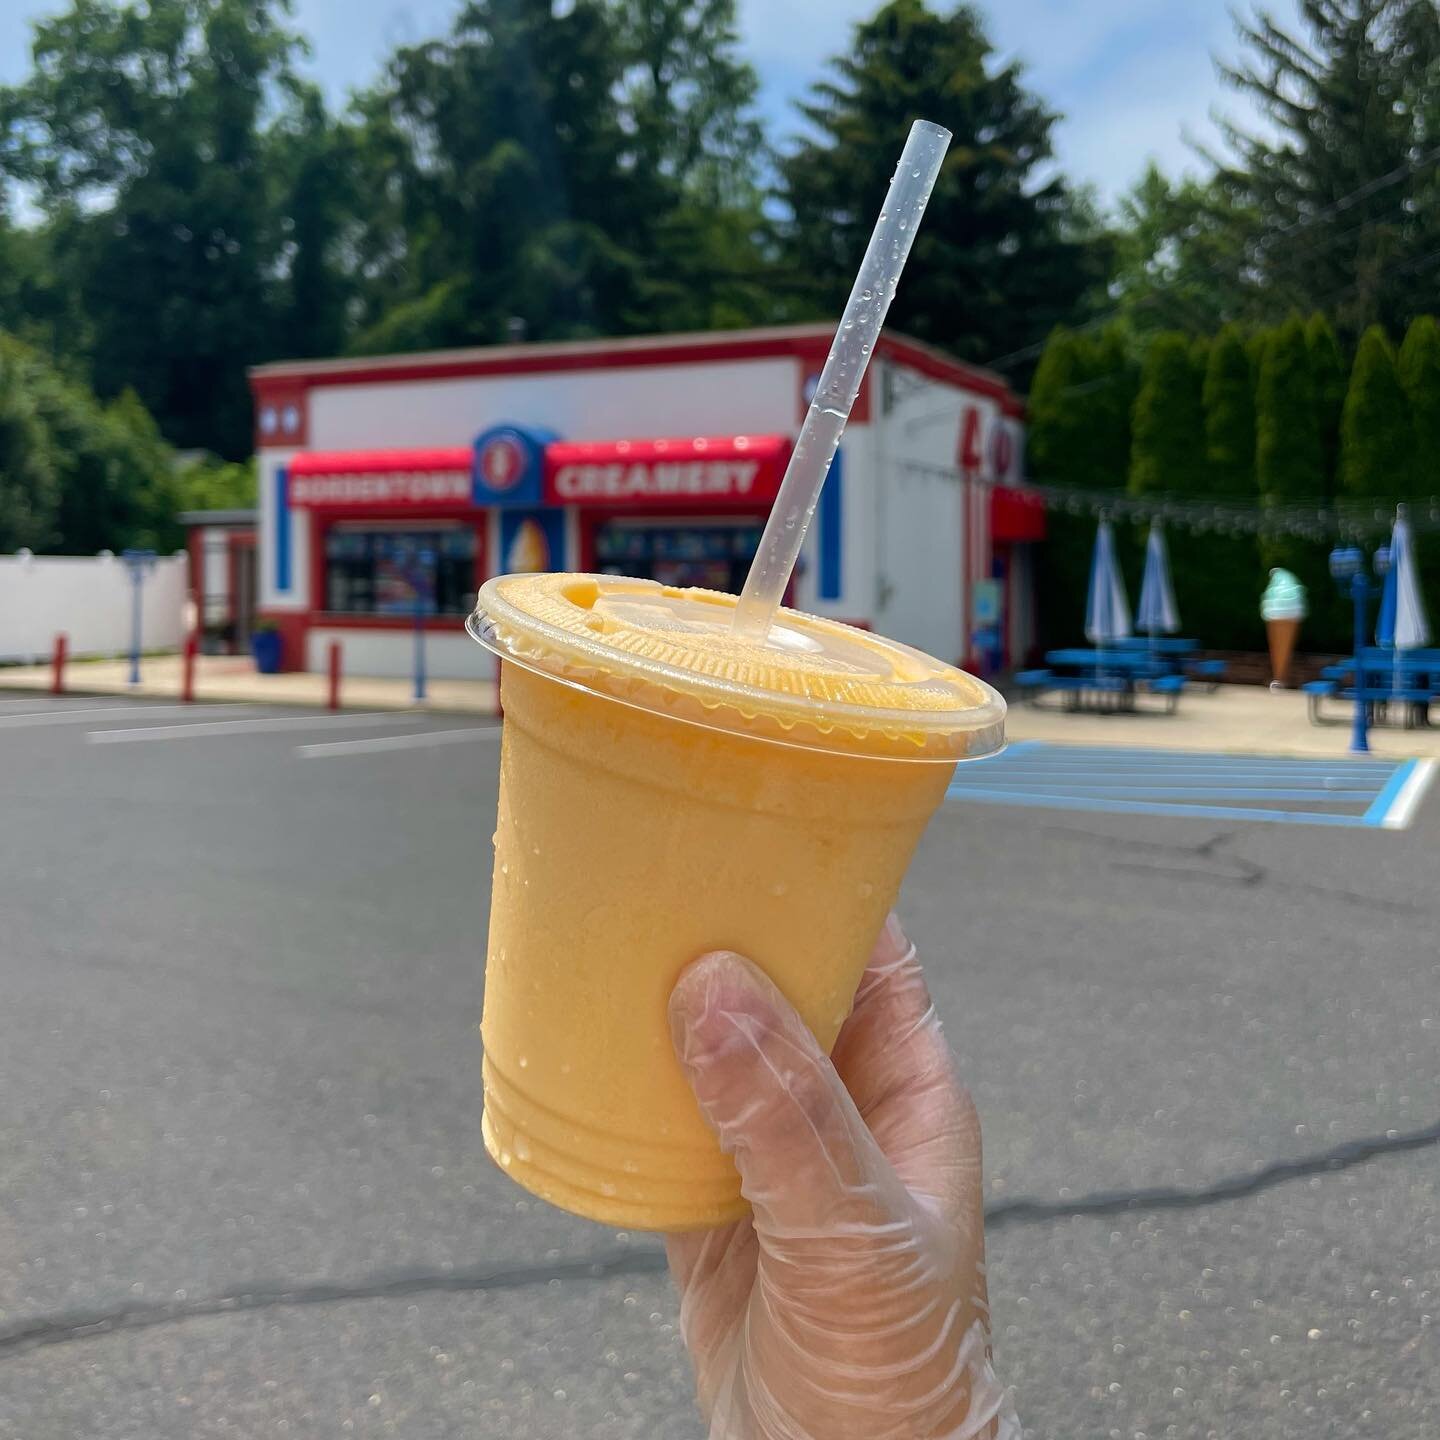 What&rsquo;s more refreshing than a mango extreme blend? 🥭🔥
Open until 10pm tonight!
&bull;
&bull;
&bull;

#icecream #love #yum #icecreamaddict #icecreamlover #smallbiz #smallbusiness #shopsmall #shoplocal #newjersey #newjerseyfood #newjerseyfoodie